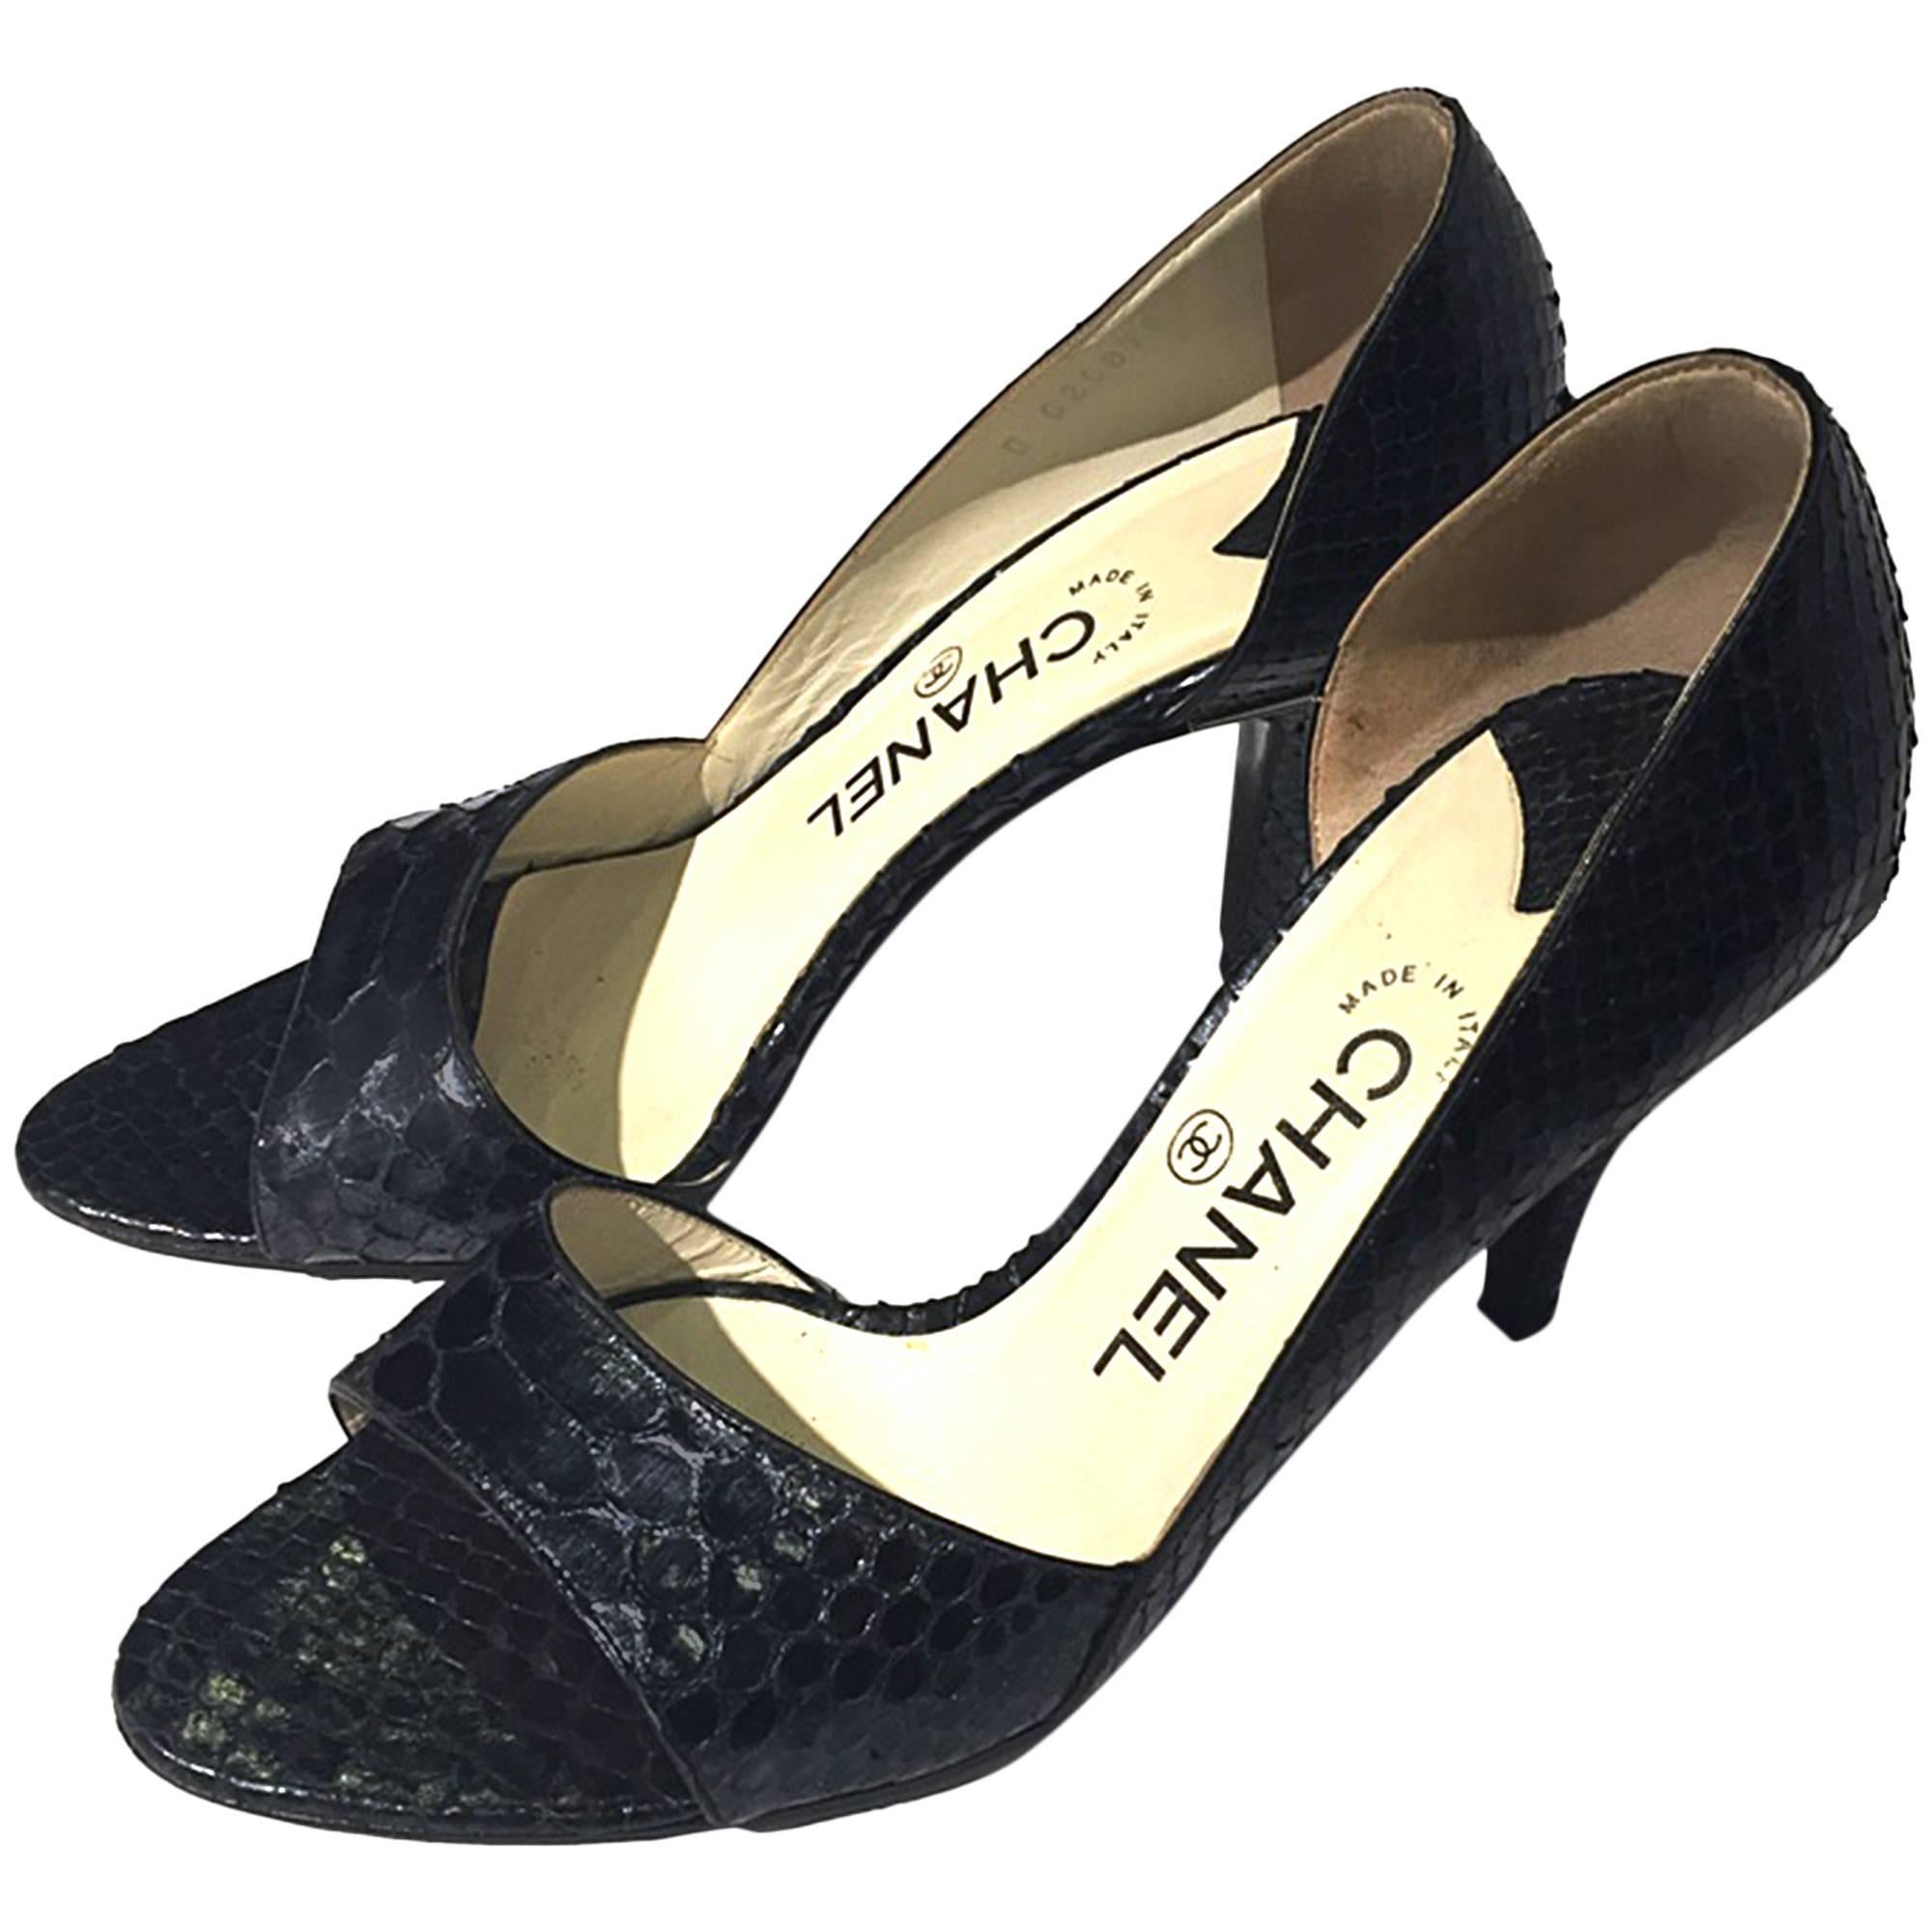 90s Chanel snake leather peep toes in black, Sz 8 For Sale